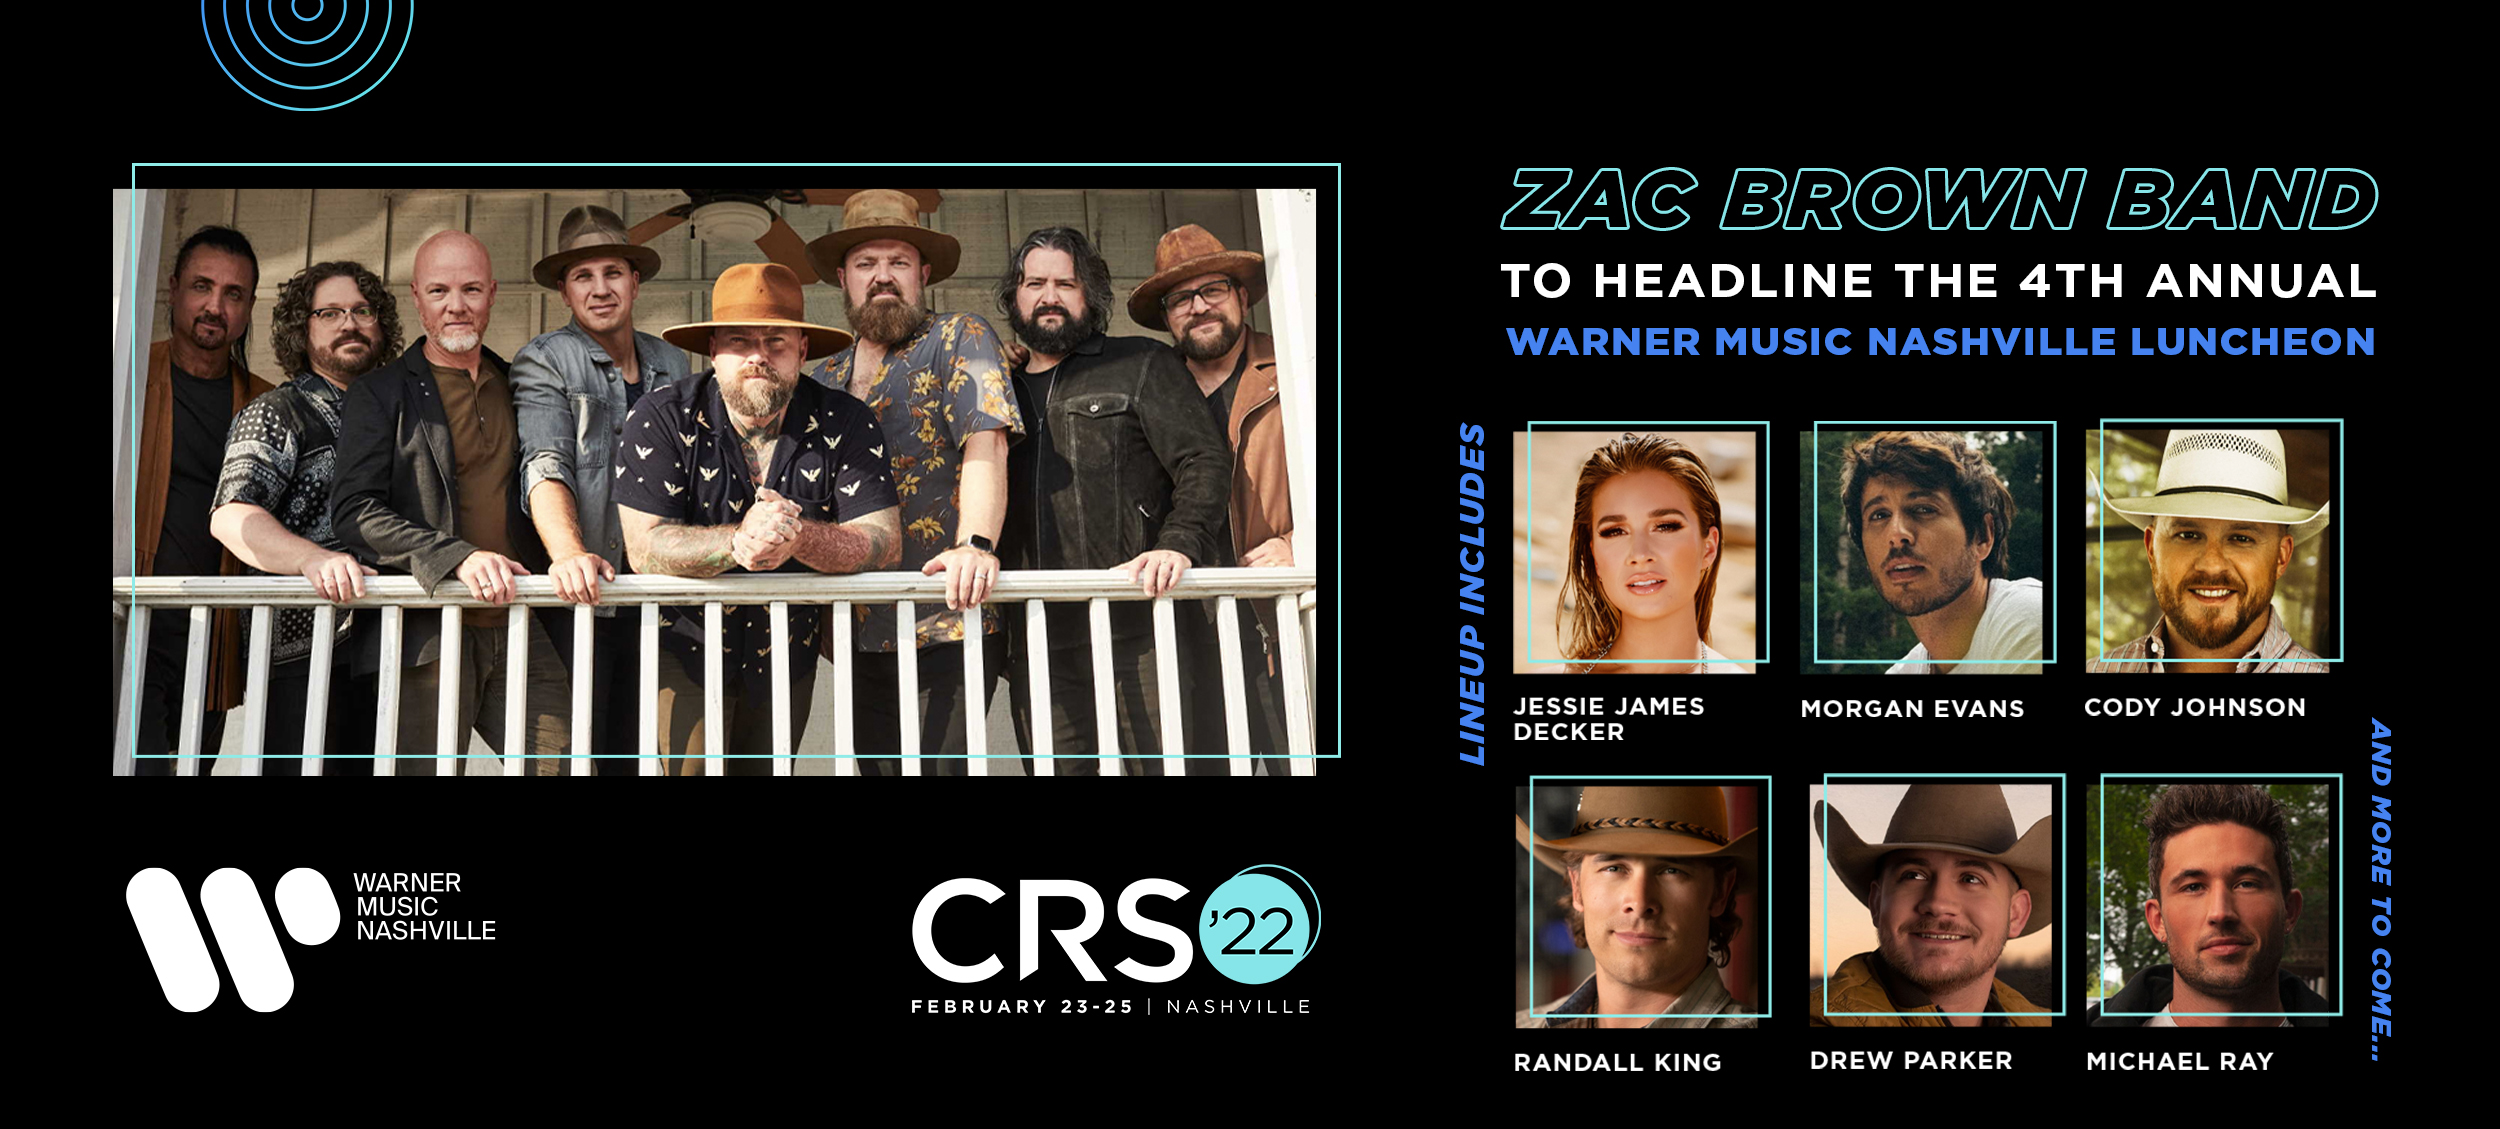 Zac Brown Band Set To Headline the 4th Annual Warner Music Nashville CRS 2022 Luncheon